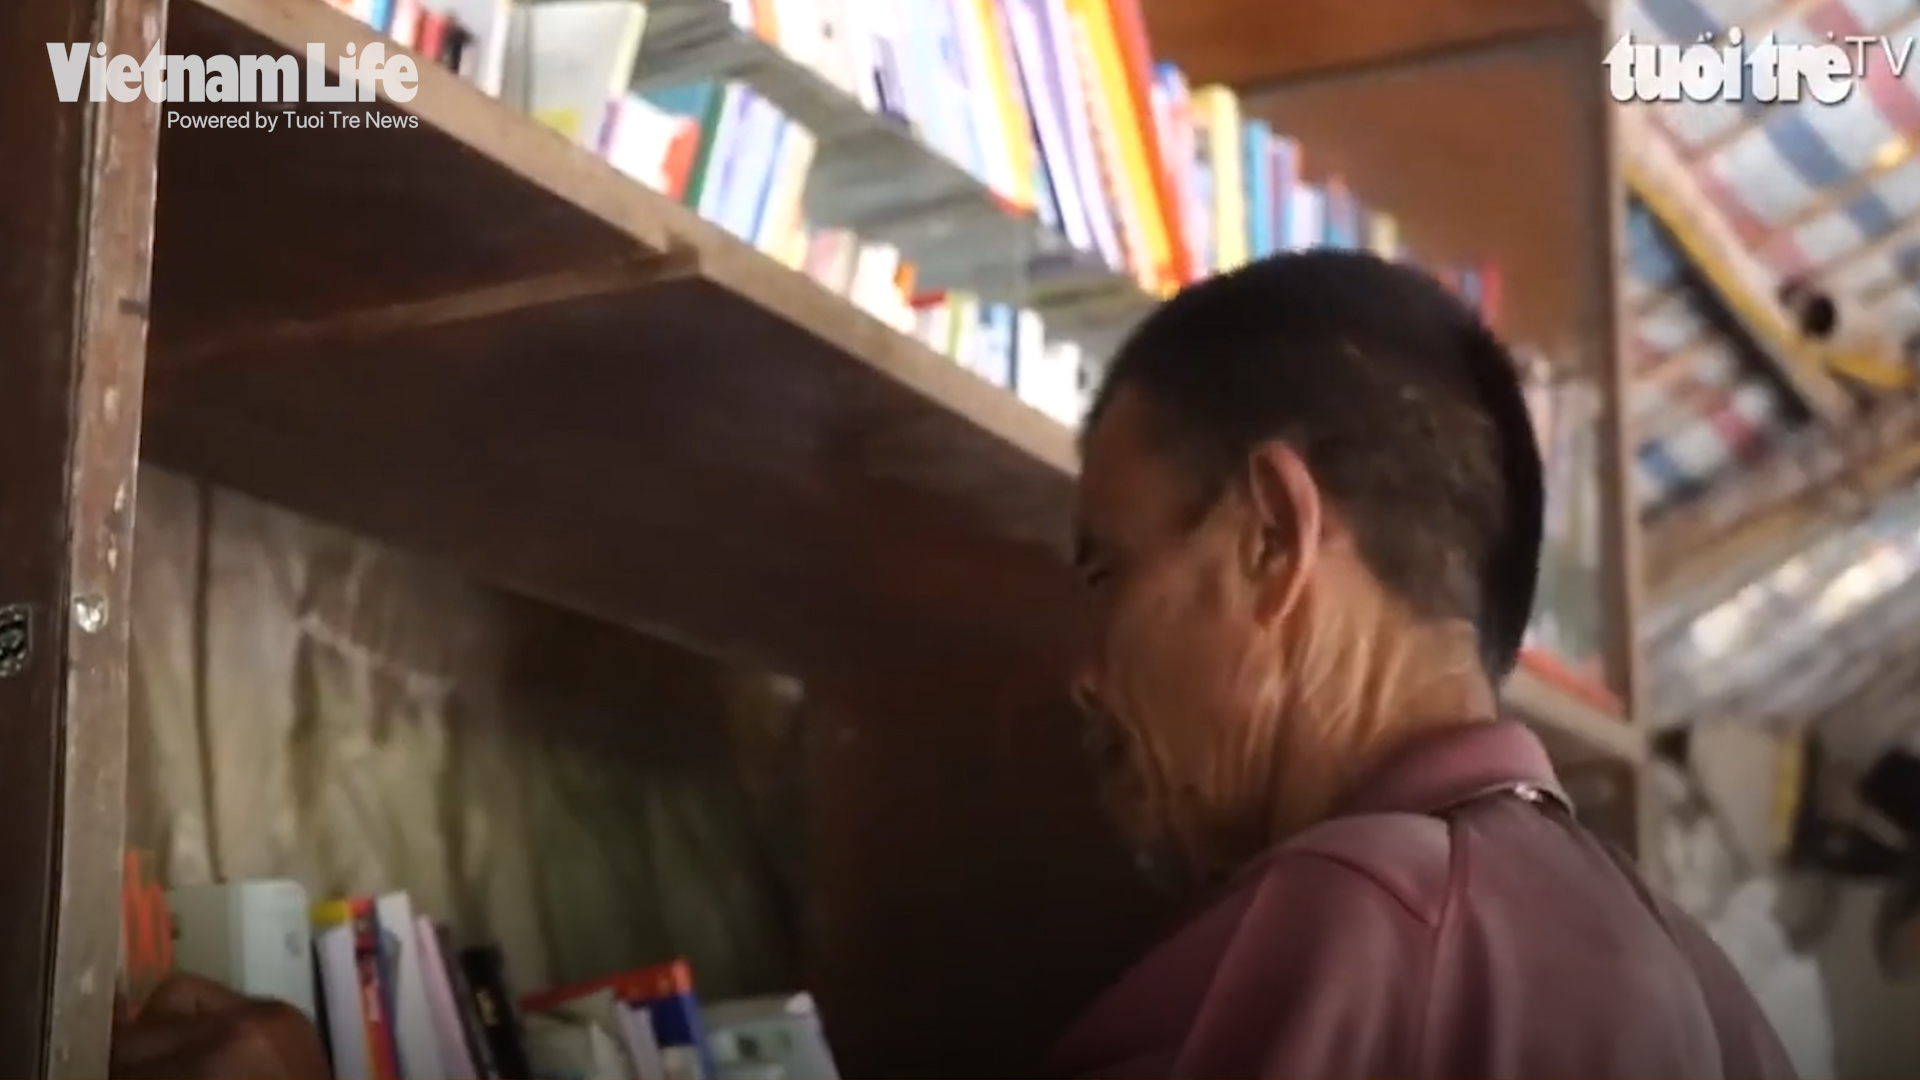 75-year-old Hanoian builds free children’s library in river slum